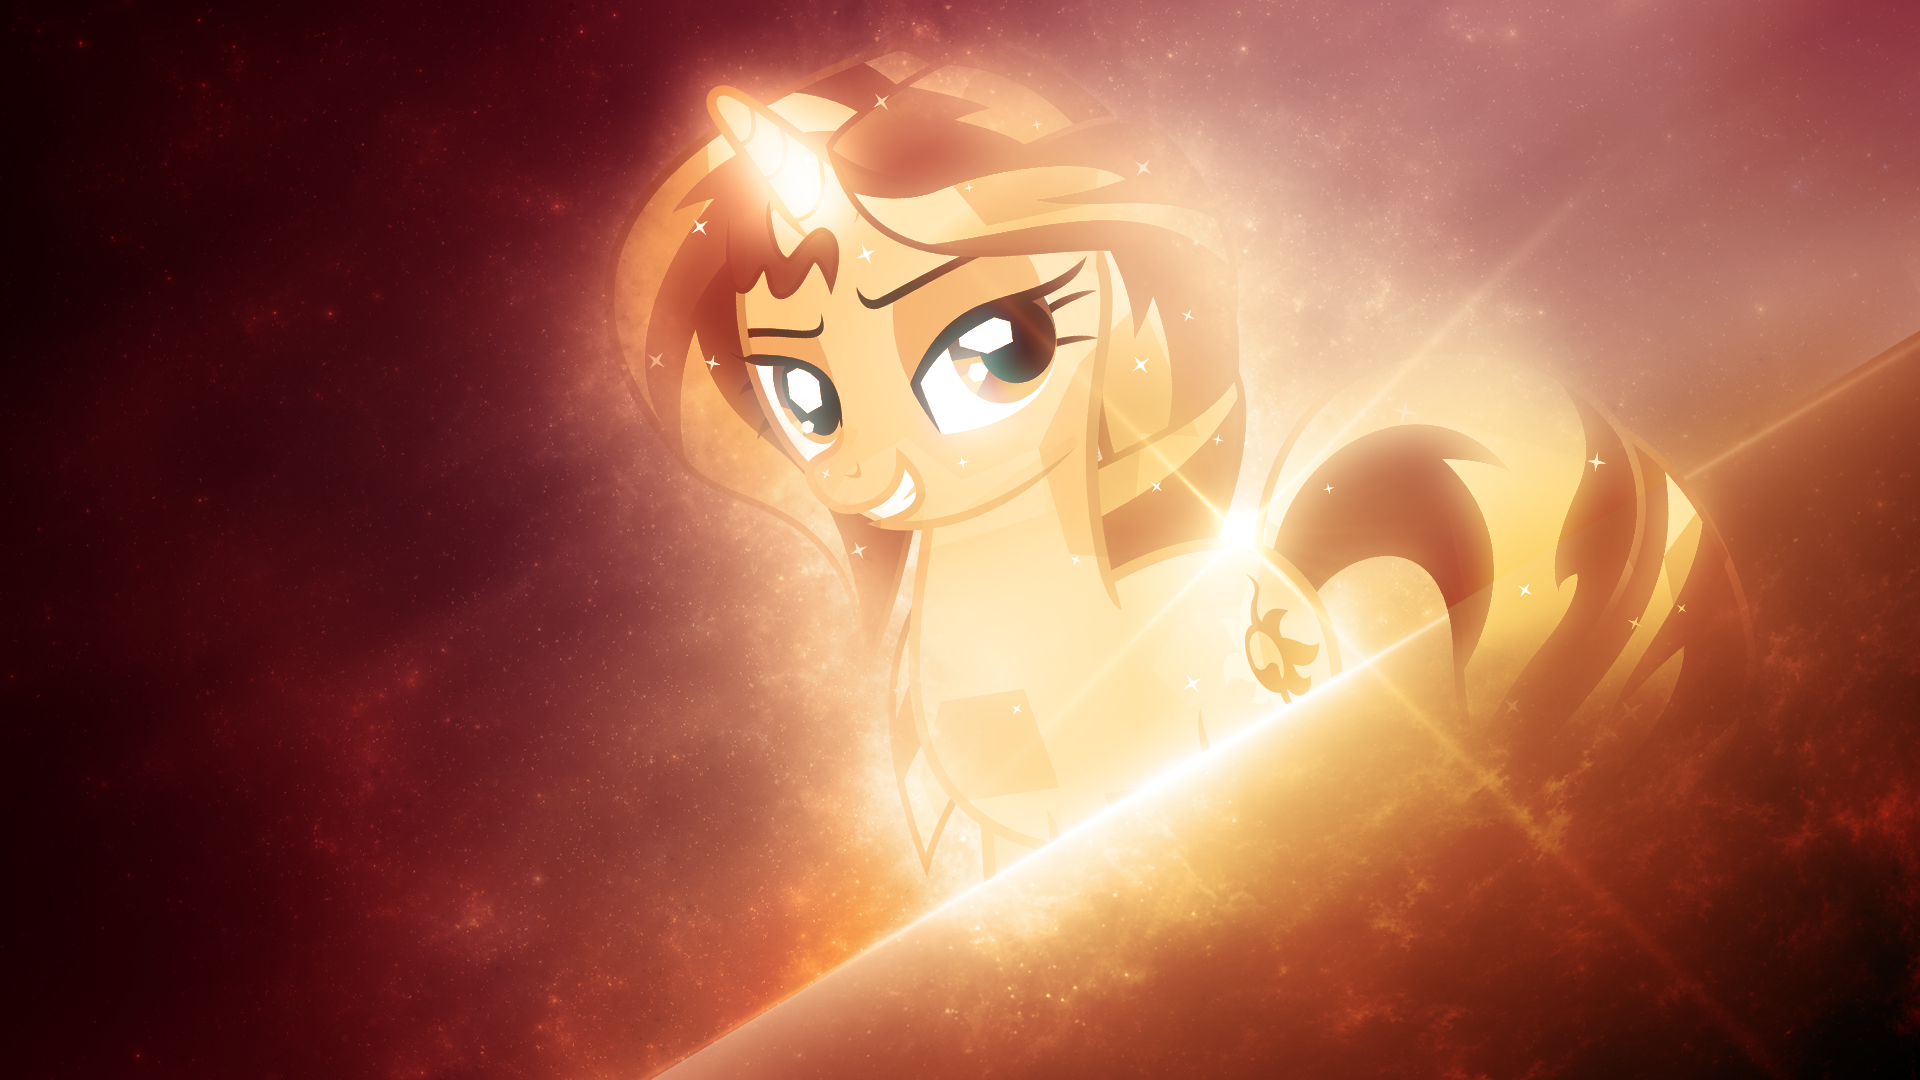 Sunset Crystal - Wallpaper by TheShadowStone and Tzolkine